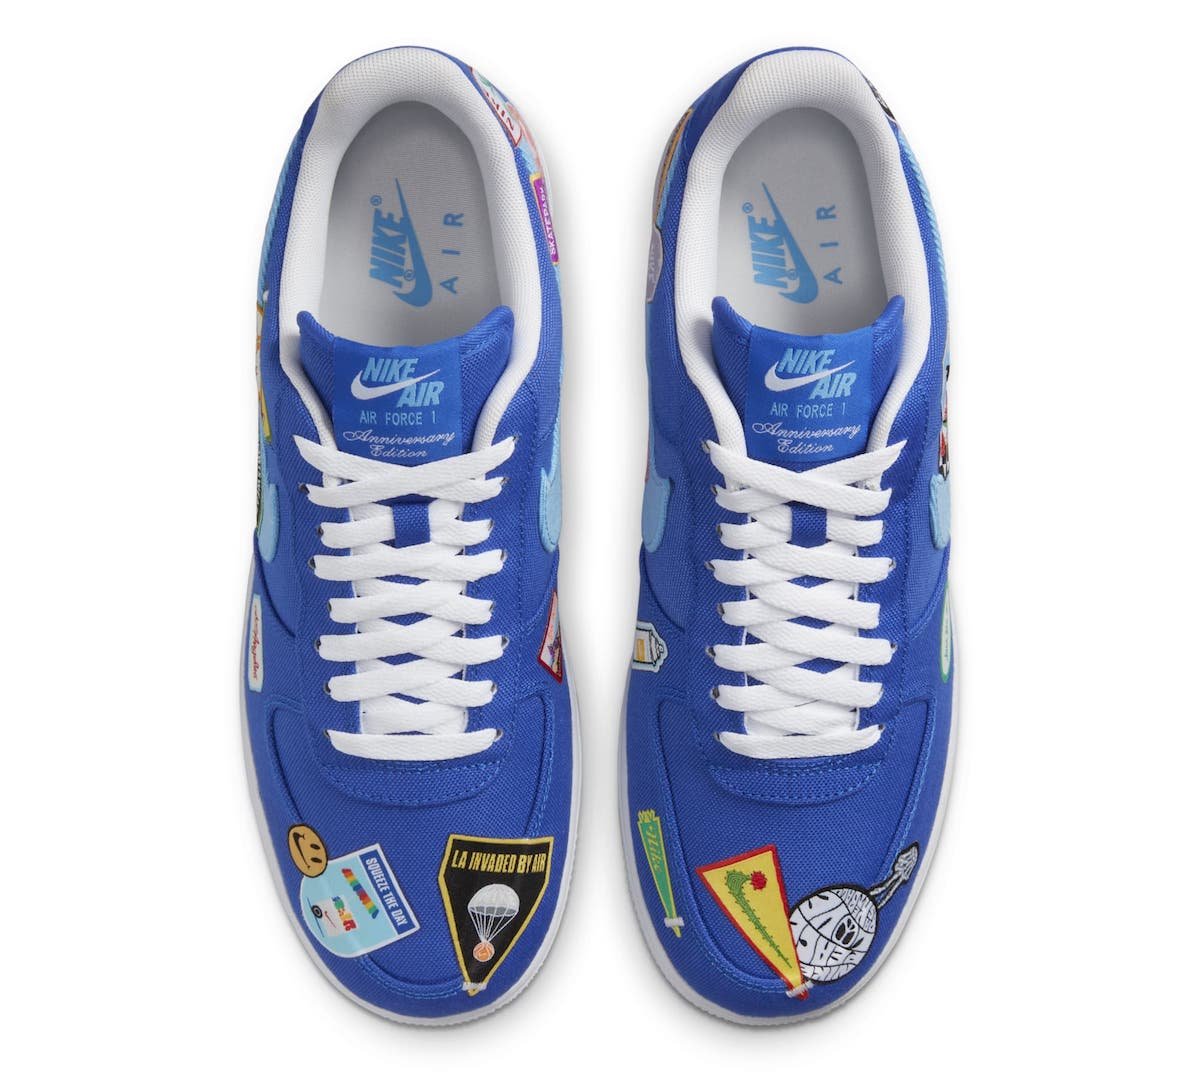 Nike-Air-Force-1-Low-Los-Angeles-DX2304-400-Release-Date-3.jpeg